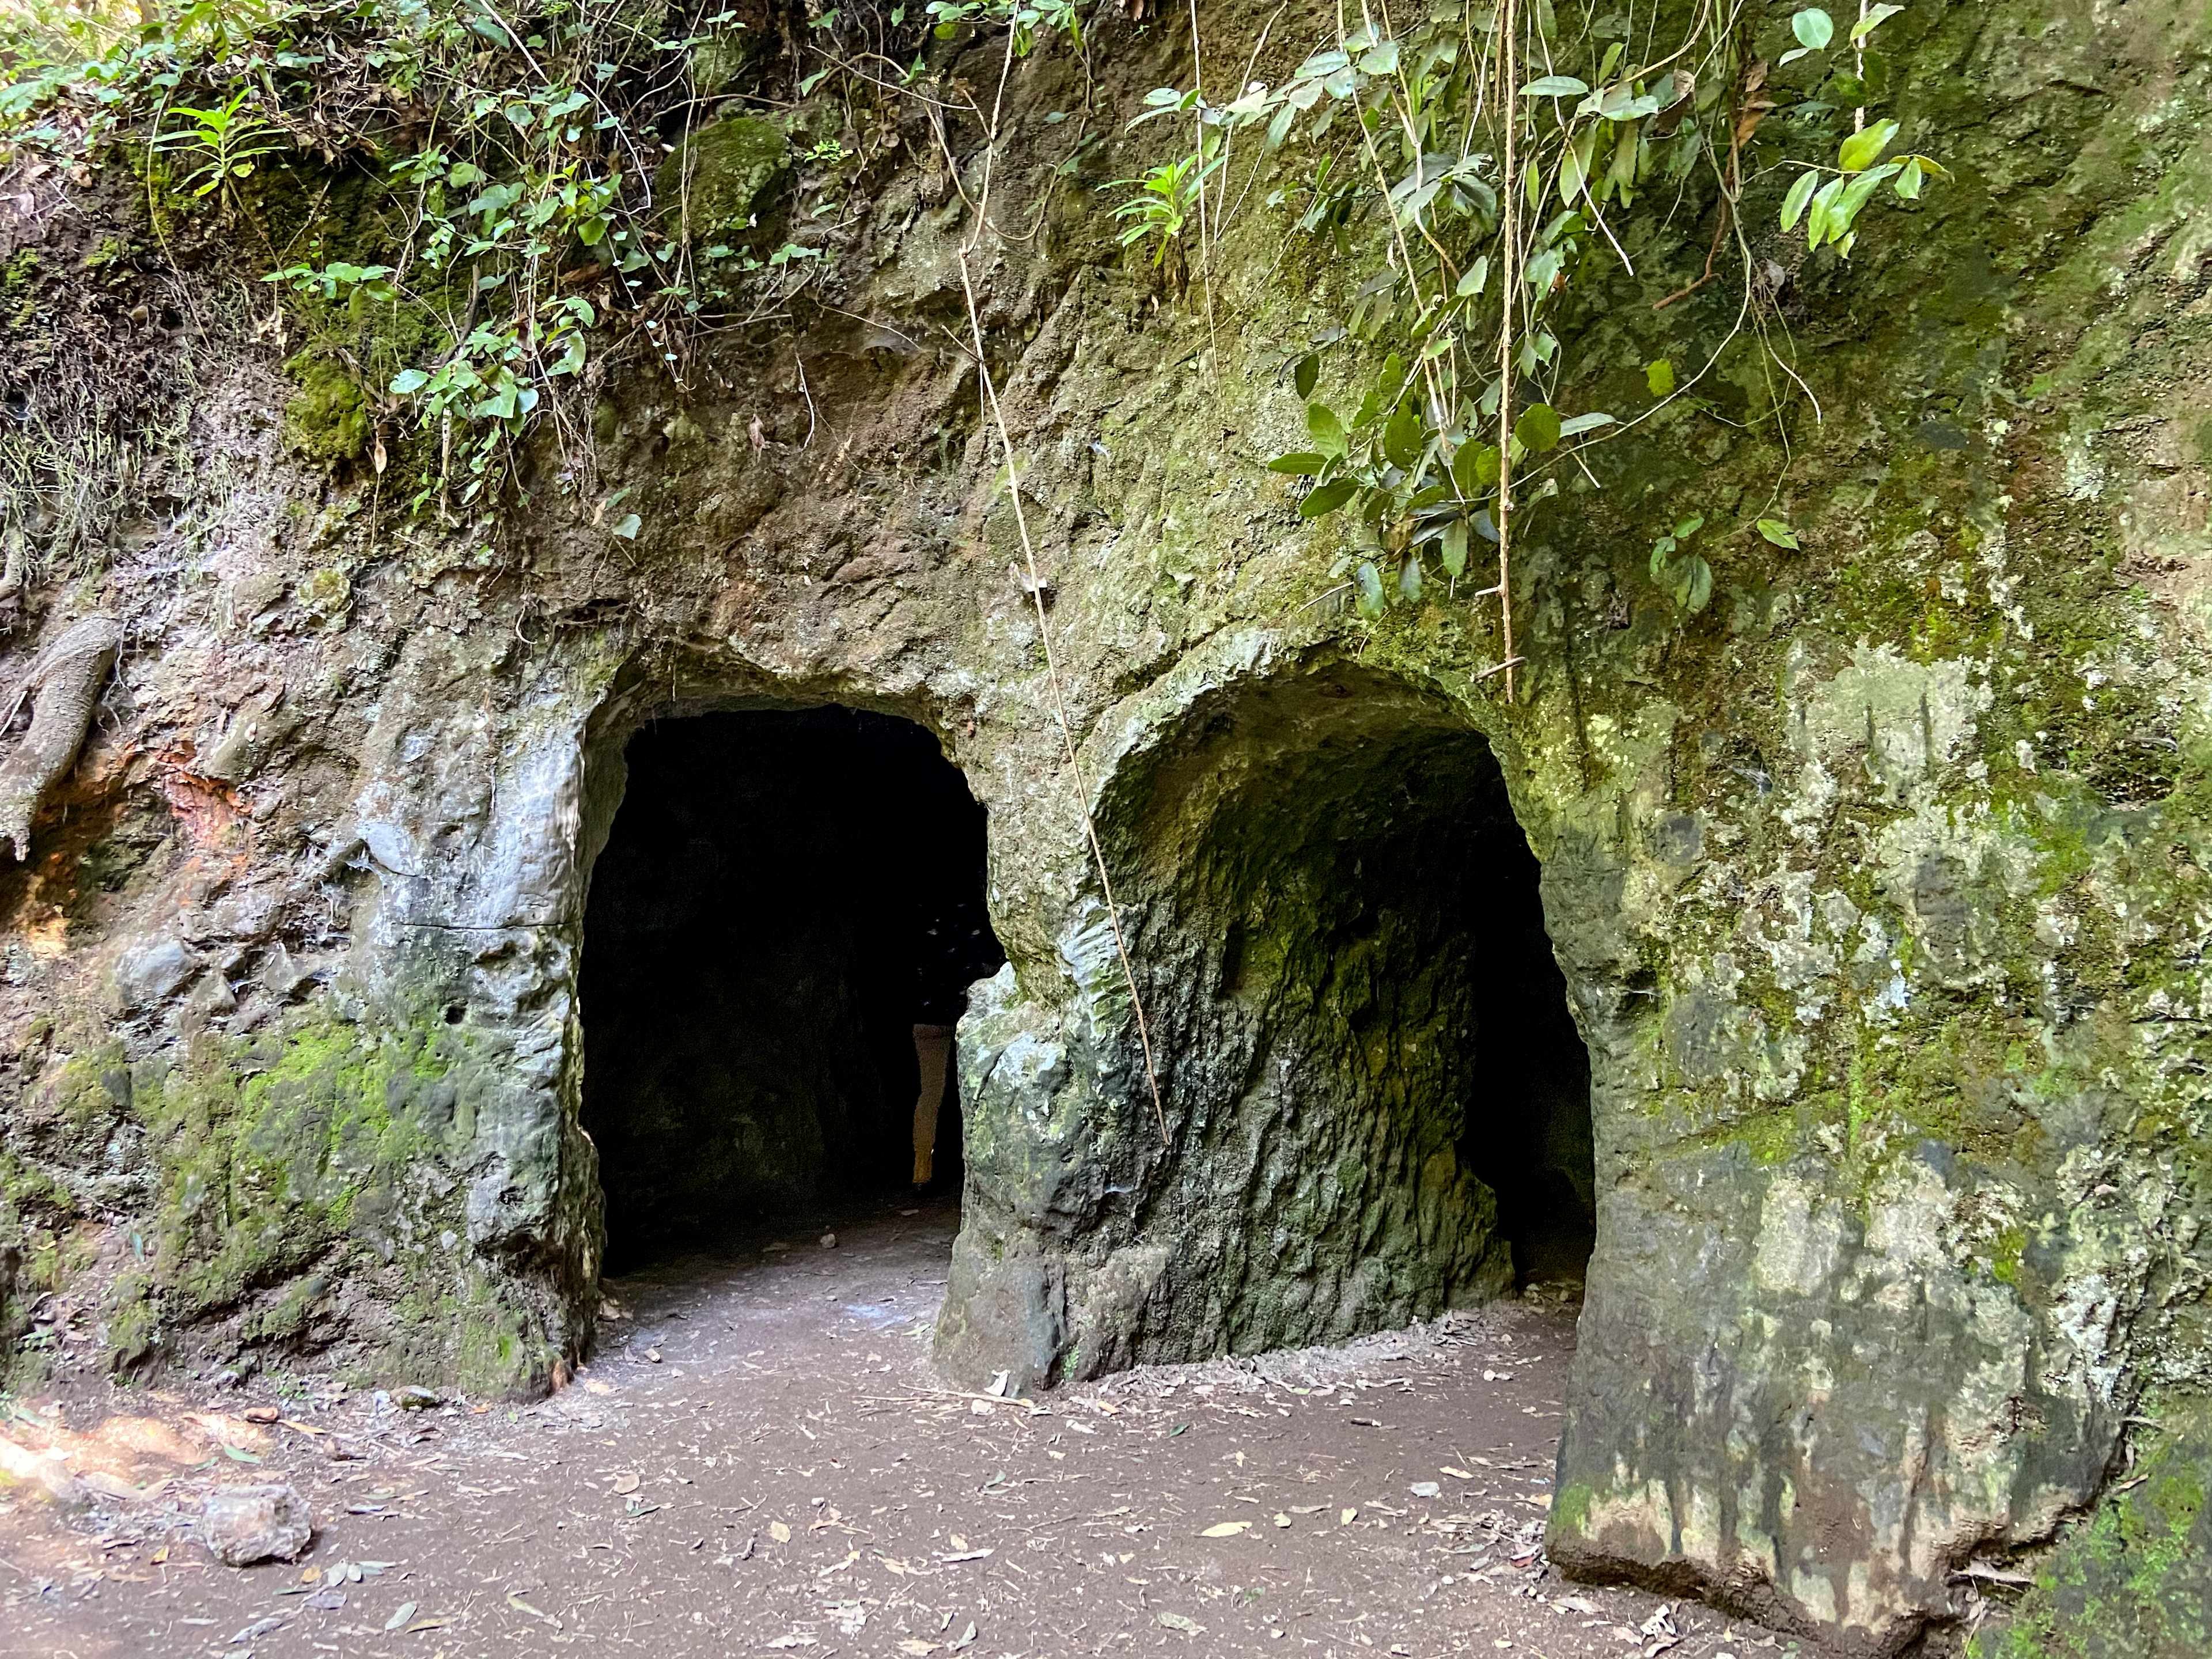 Caves along the hiking trail